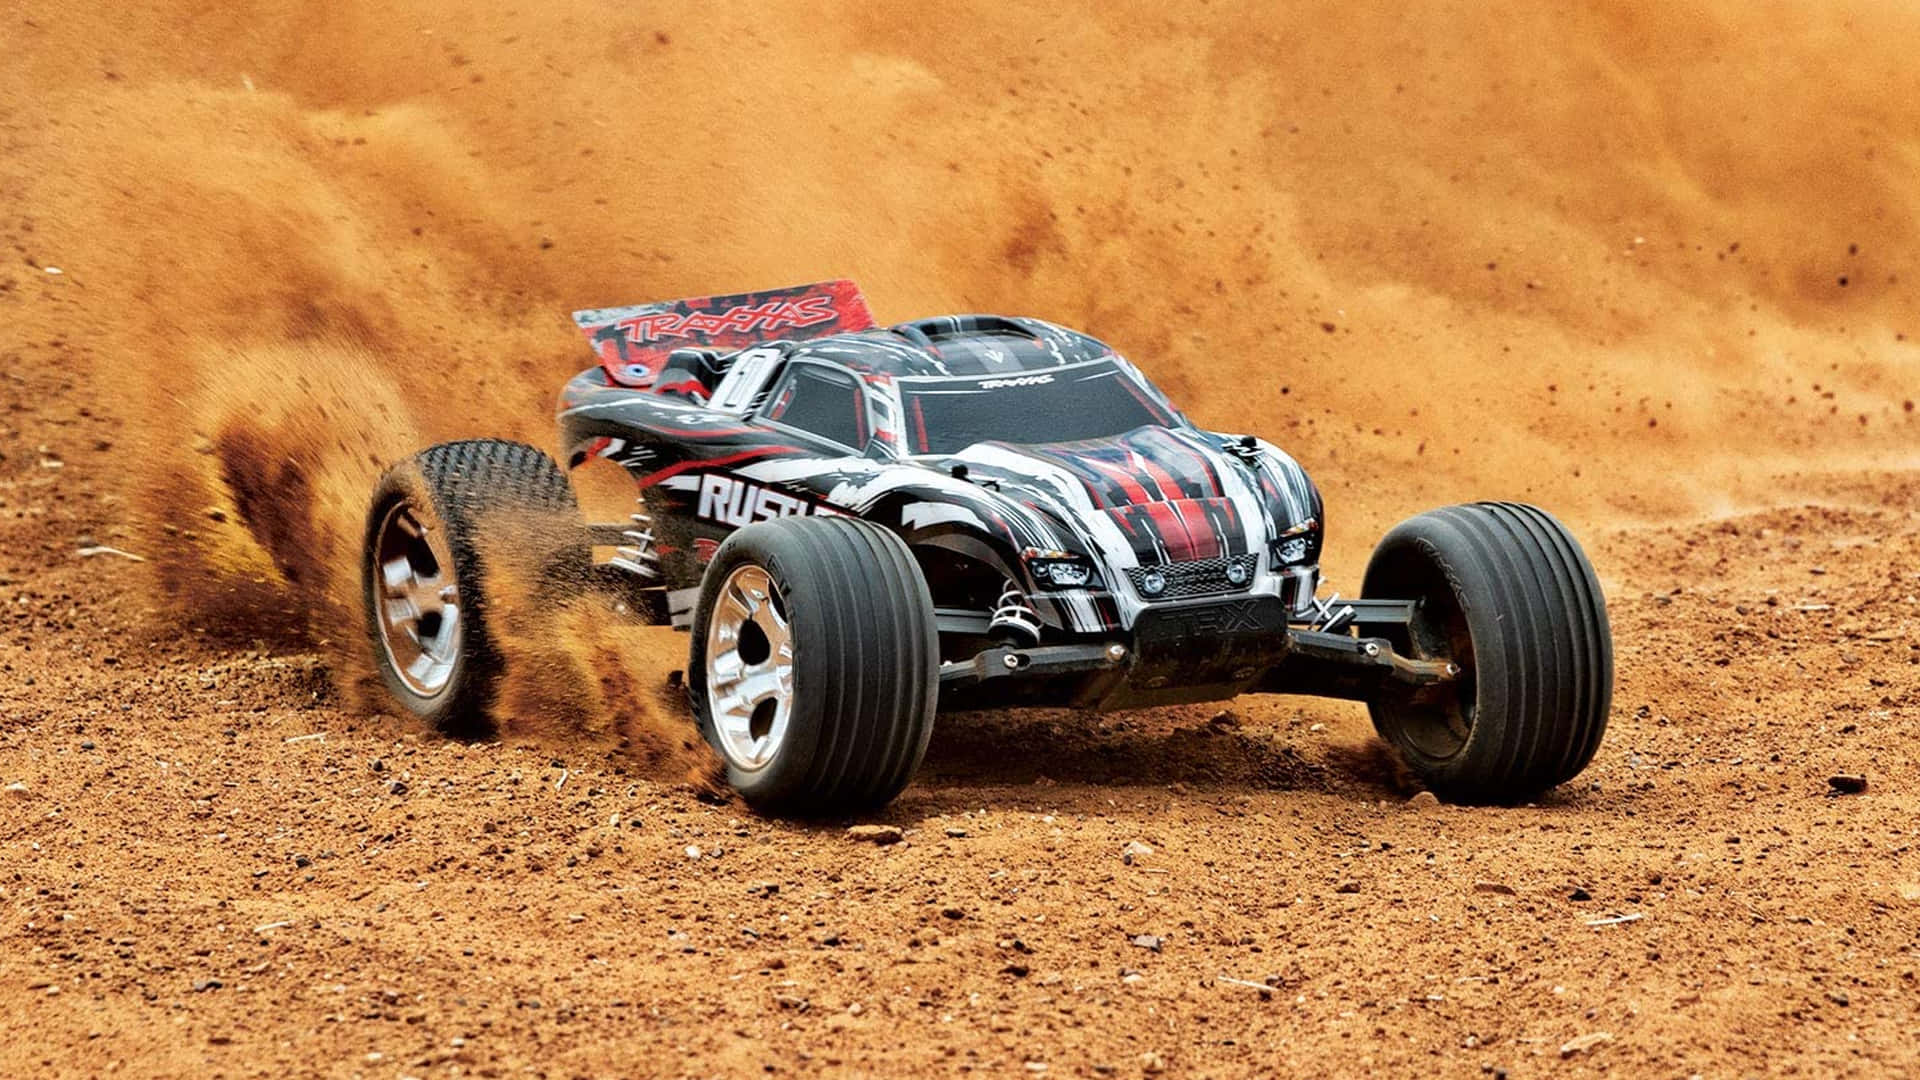 A Remote Control Car Driving On A Dirt Field